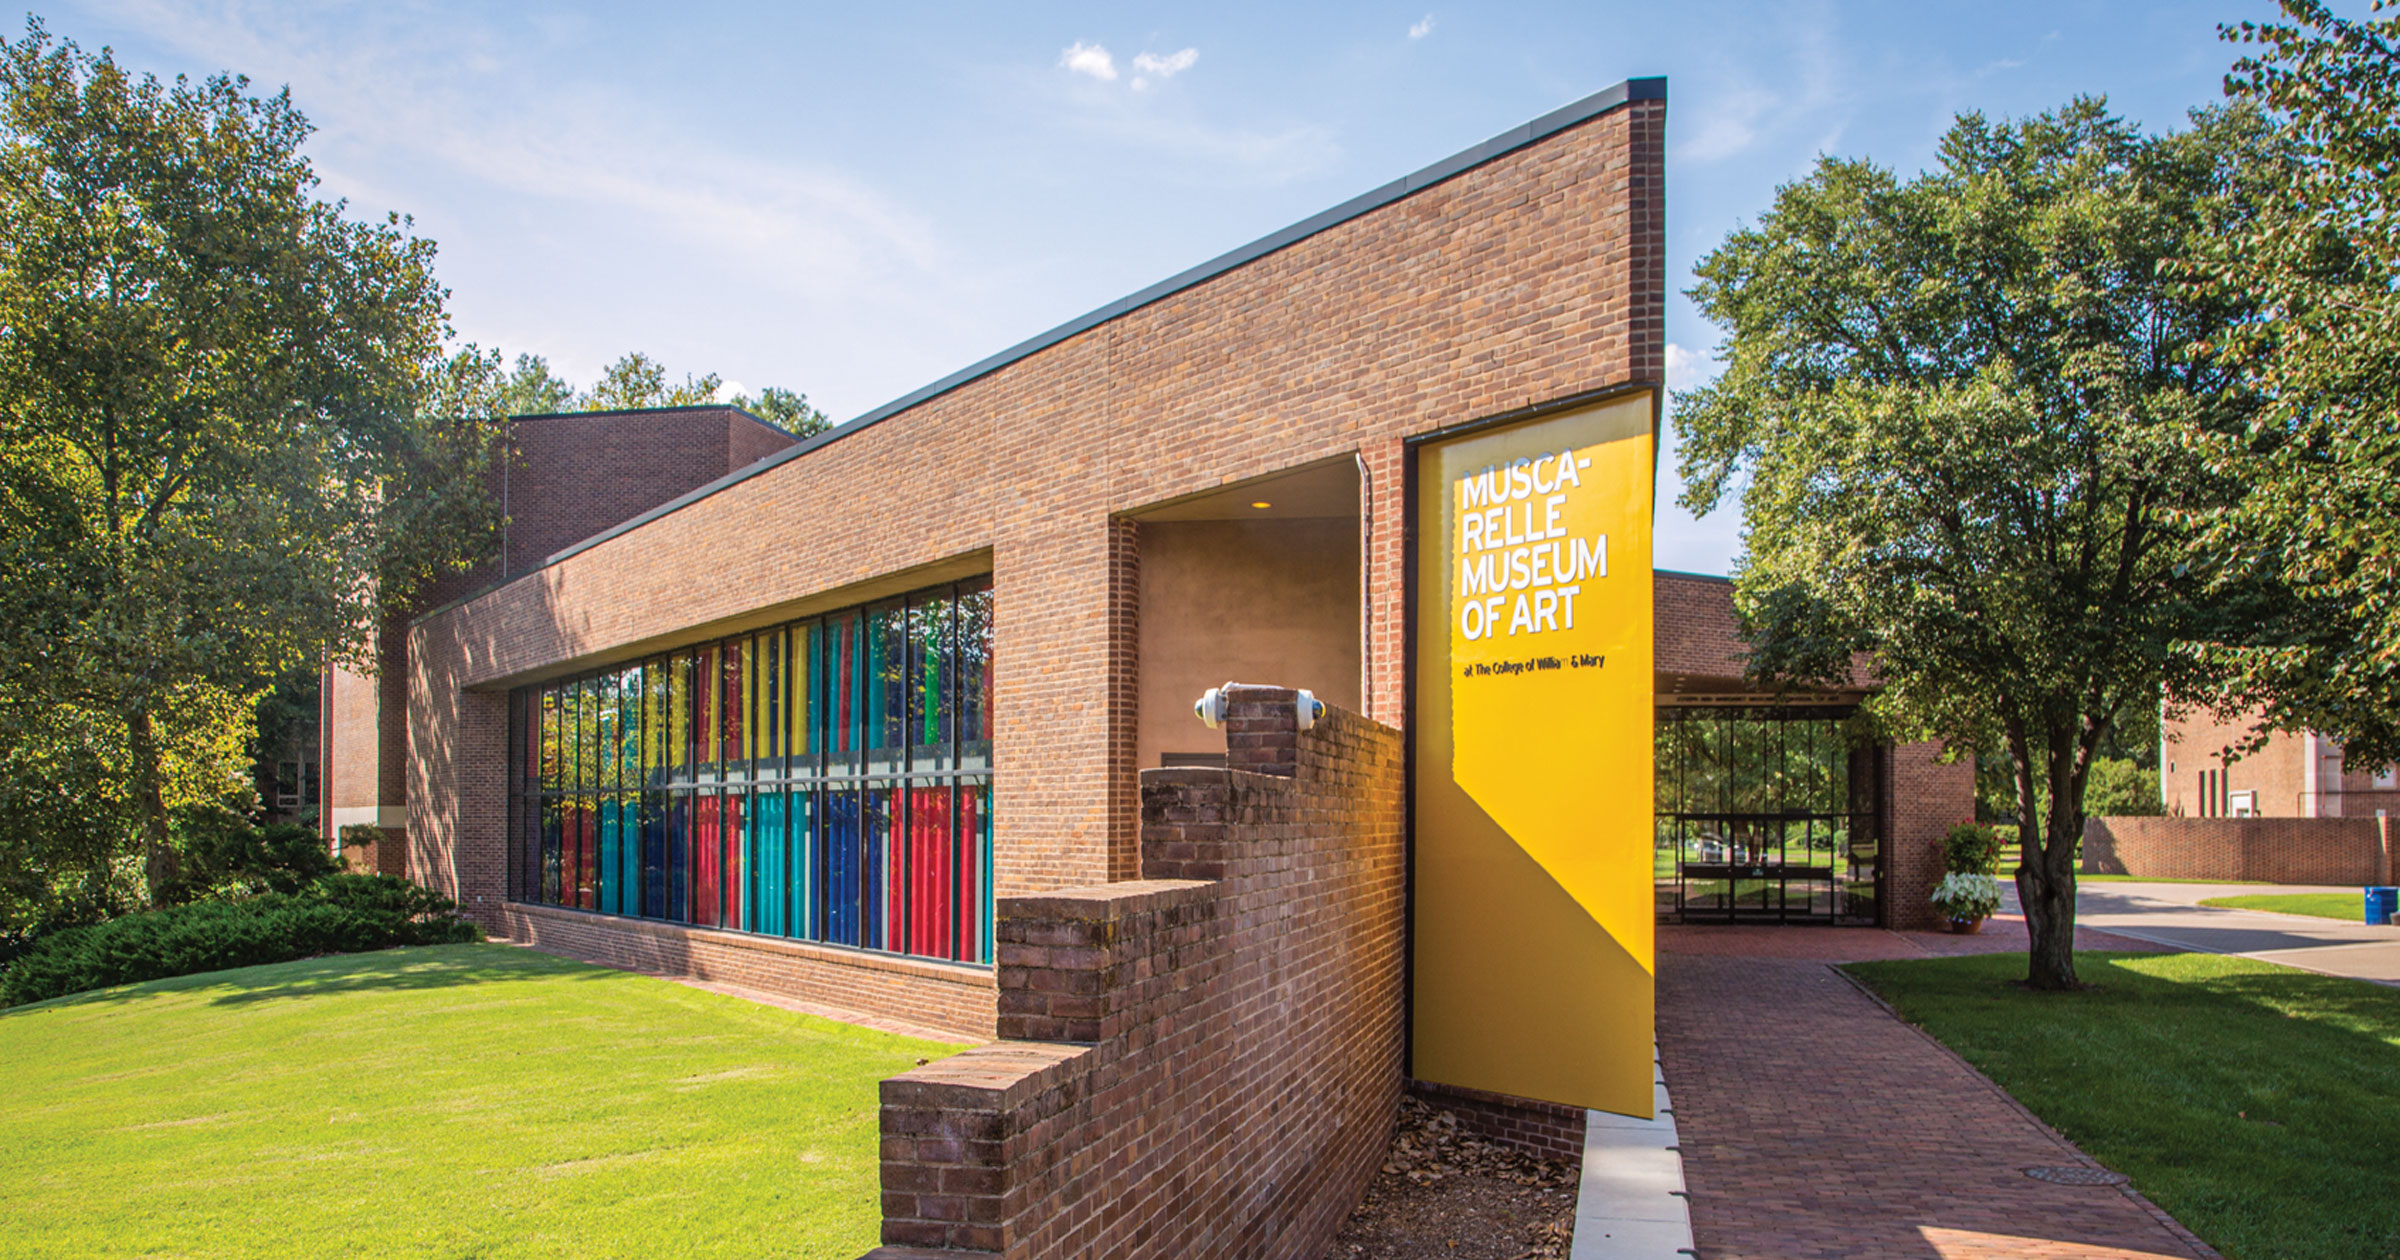 Color photograph of the exterior of the Muscarelle Museum of Art at William & Mary in Williamsburg, Virginia. Building is red brick and one exterior wall features Sunlight Sonata, a solar light wall consisting of two levels of yellow, turquoise, cobalt, and red tubes created by artist Gene Davis for the museum.